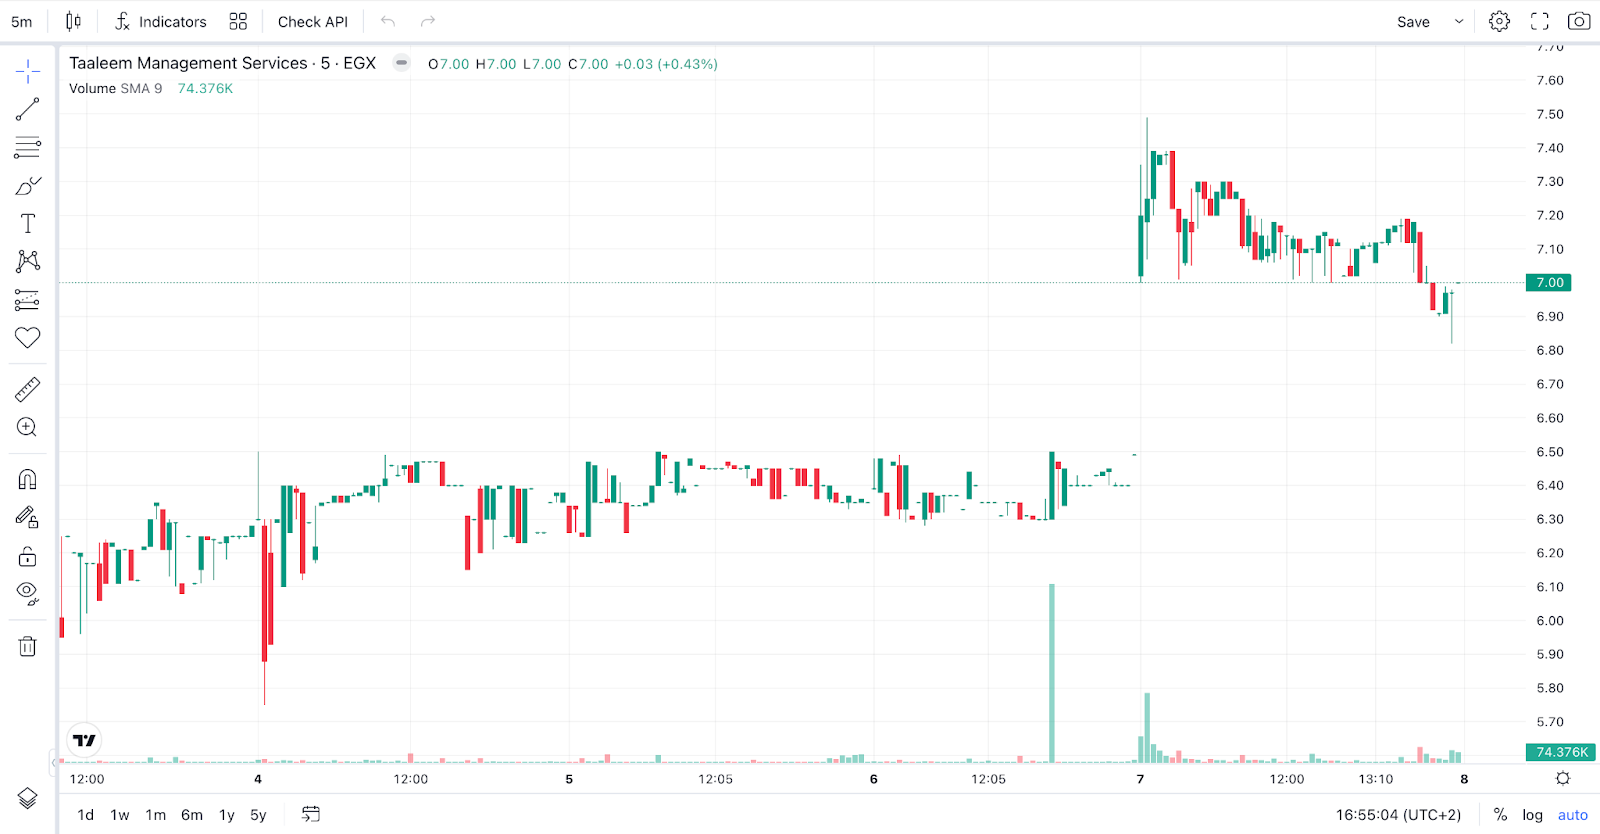 Advanced charts from the partnership of Thndr and Tradingview